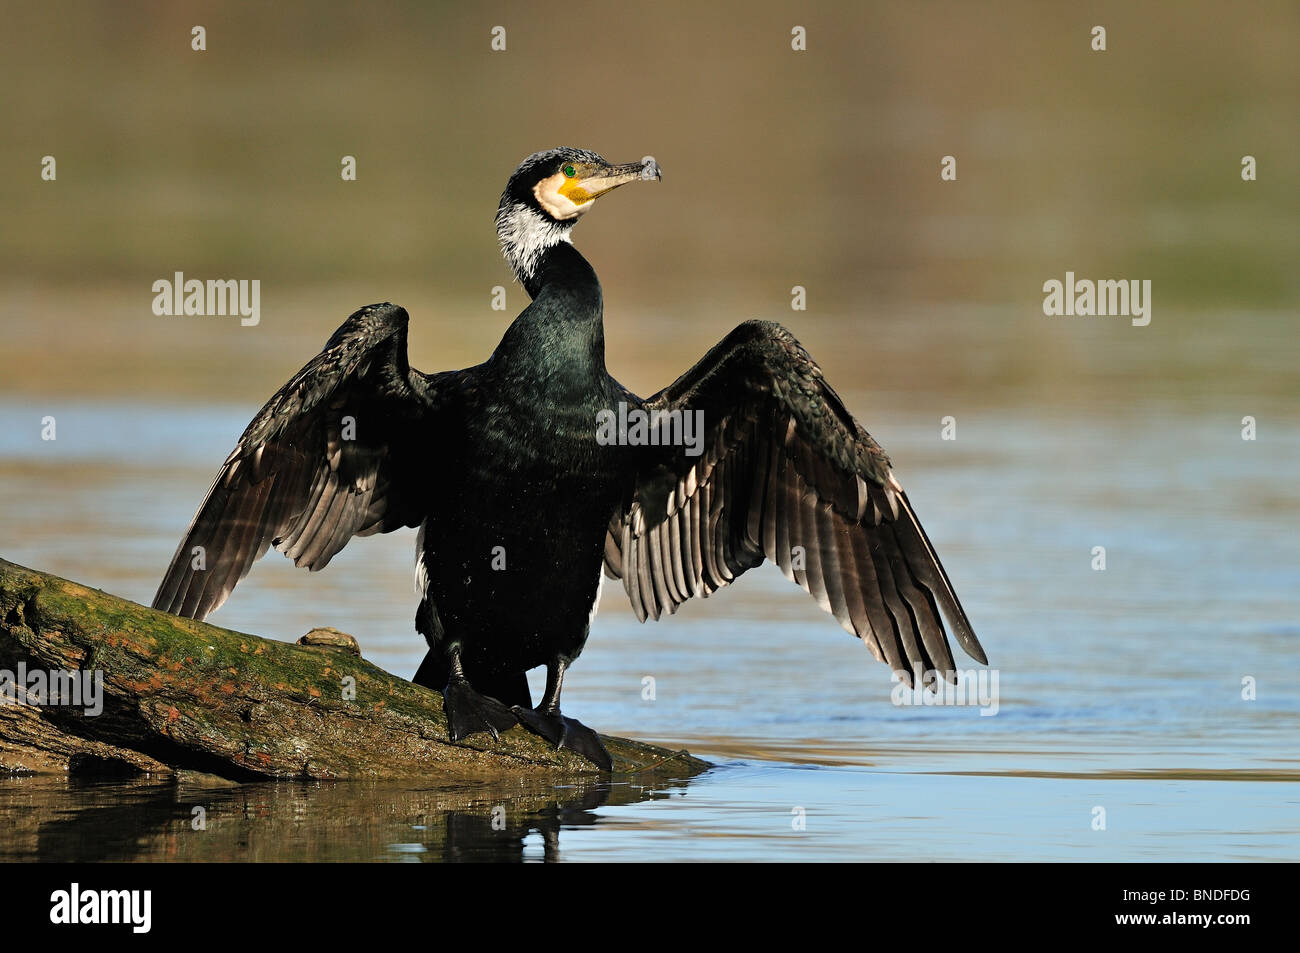 Great cormorant (phalacrocorax carbo sinensis) is drying its feathers after fishing. Stock Photo